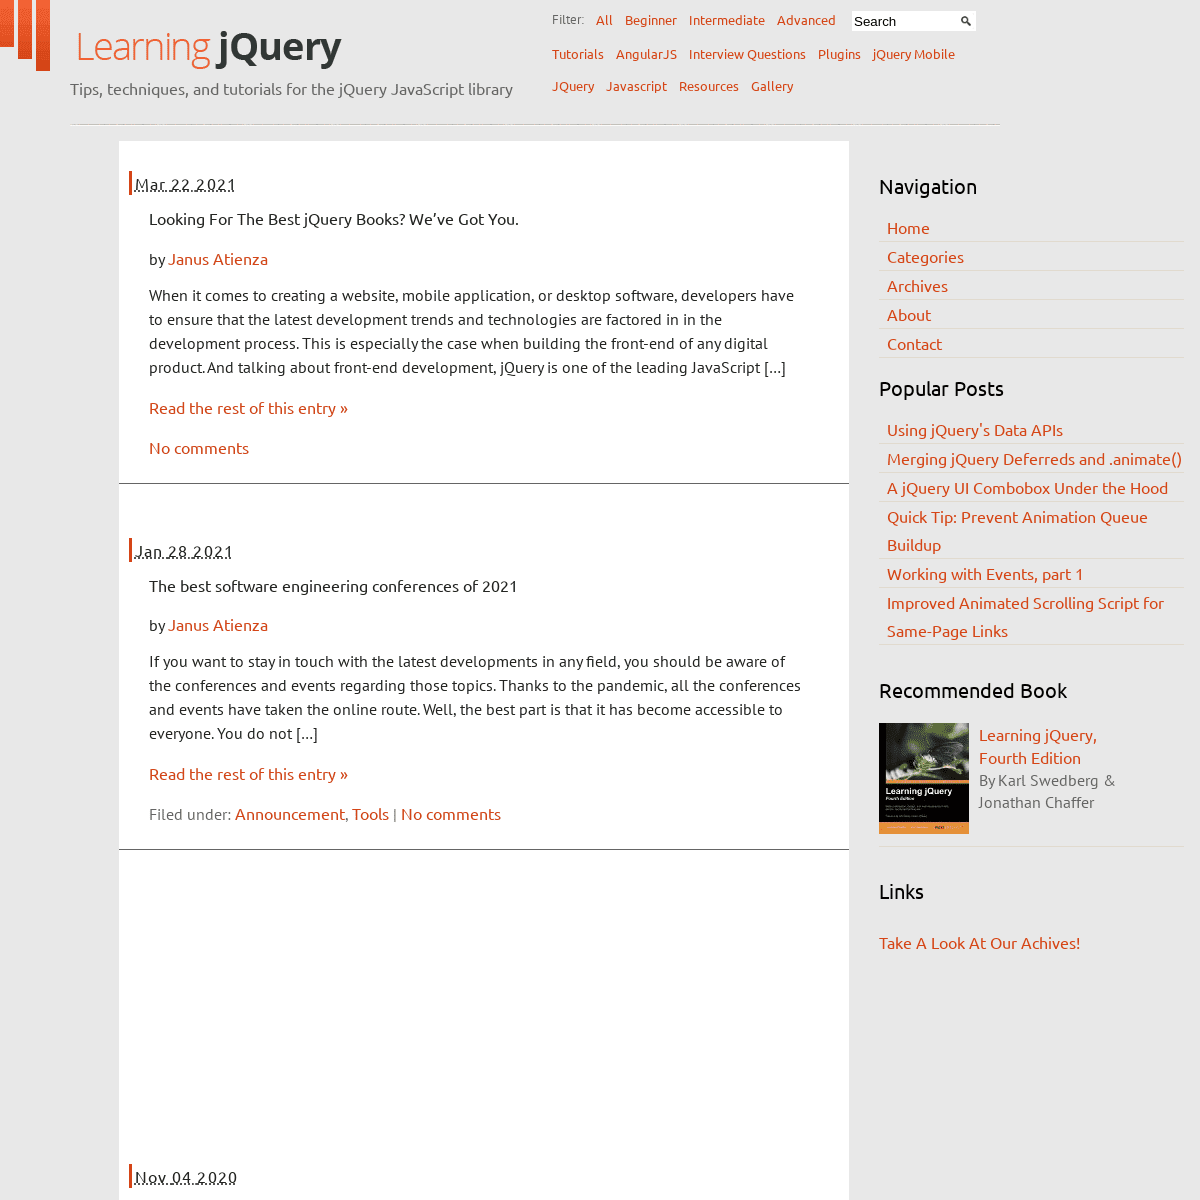 A complete backup of https://learningjquery.com